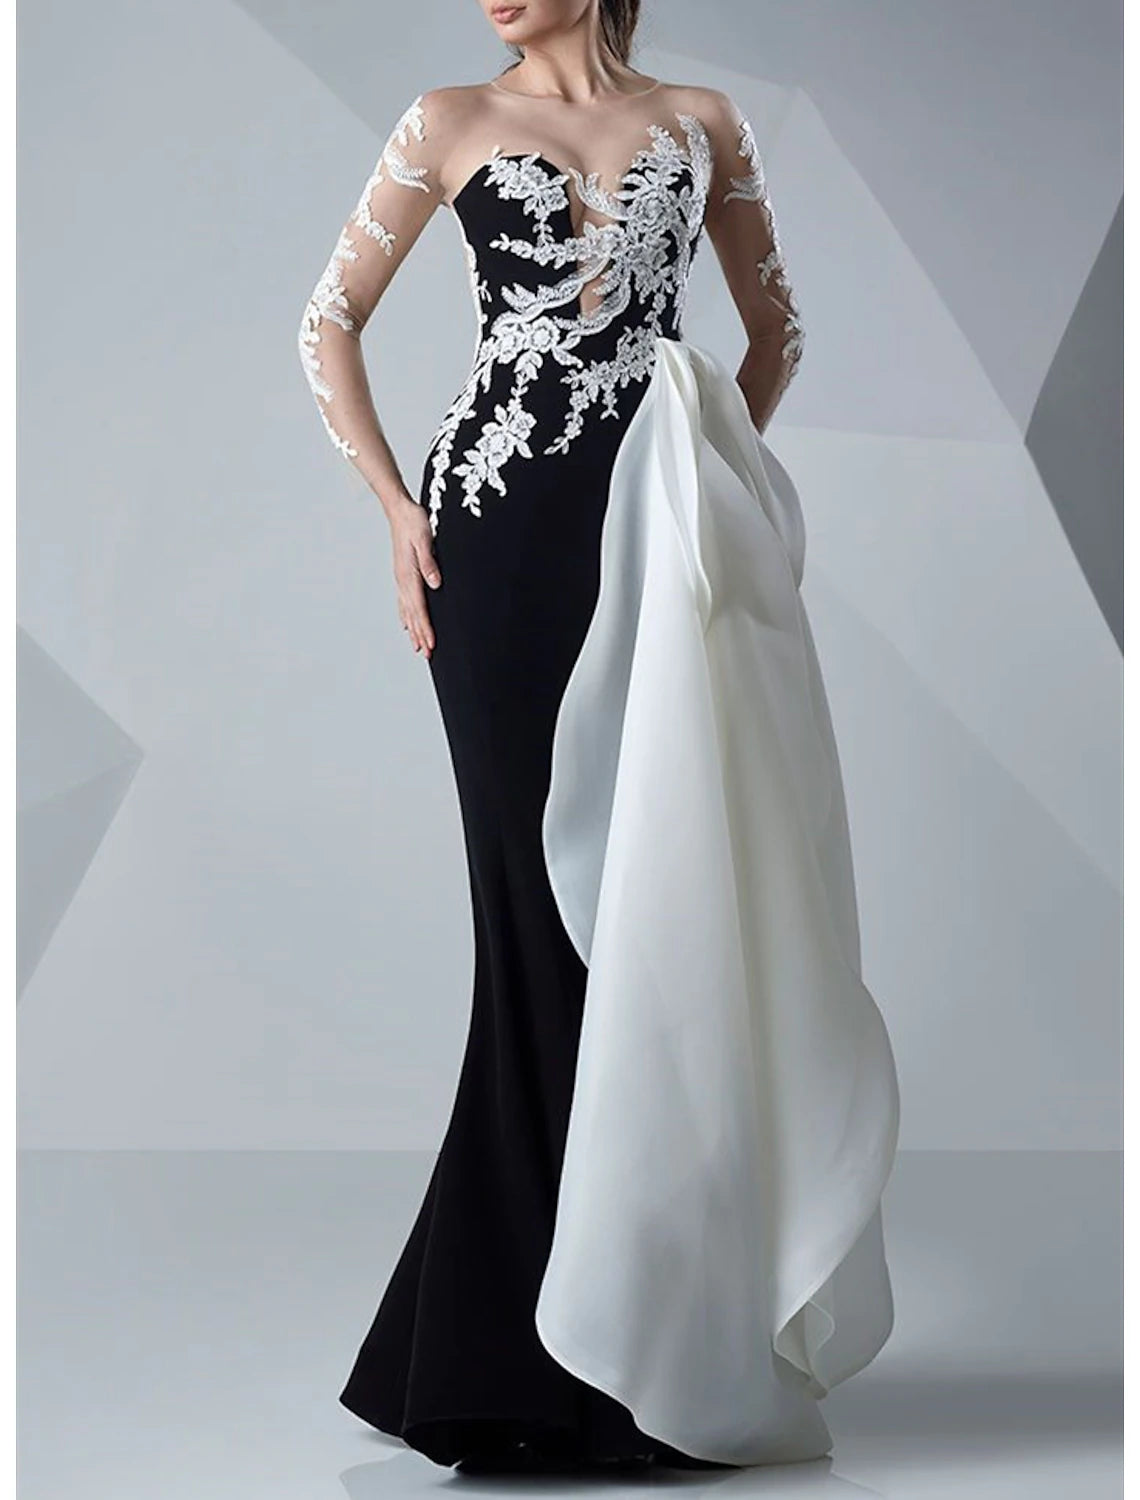 Mermaid / Trumpet Evening Gown Color Block Dress Formal Wedding Guest Floor Length Long Sleeve Jewel Neck Satin with Appliques